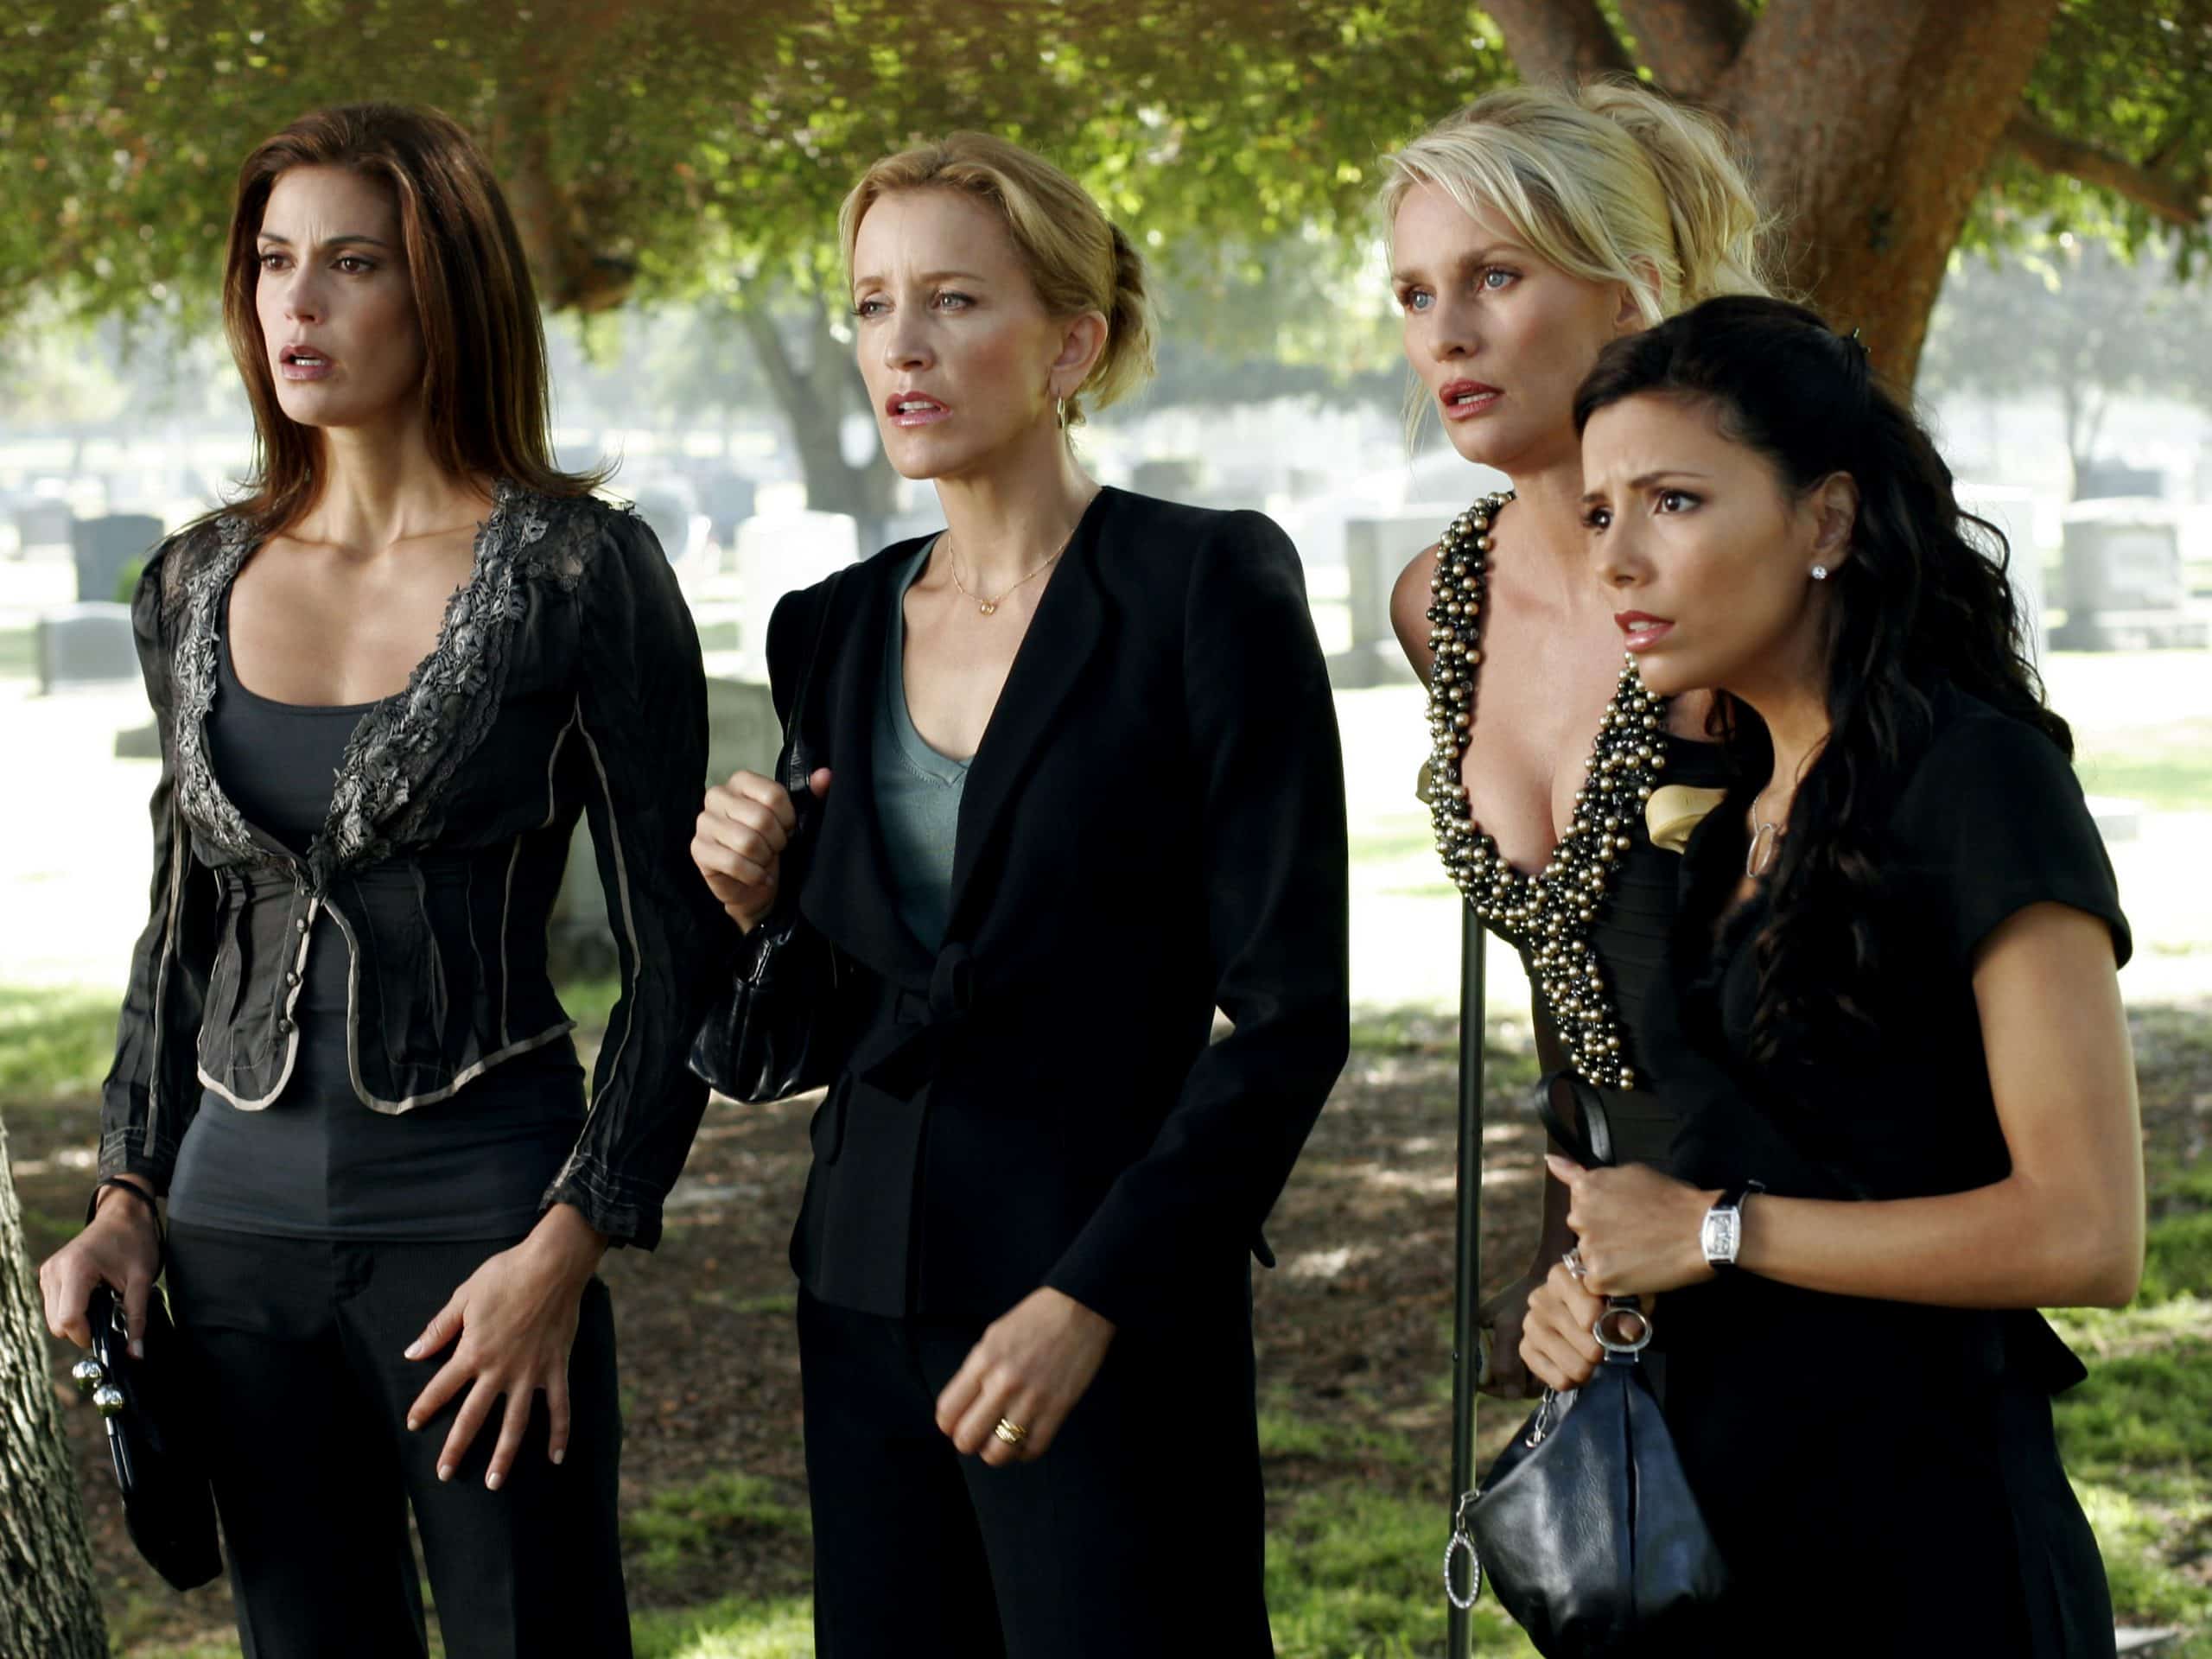 The housewives attending a funeral